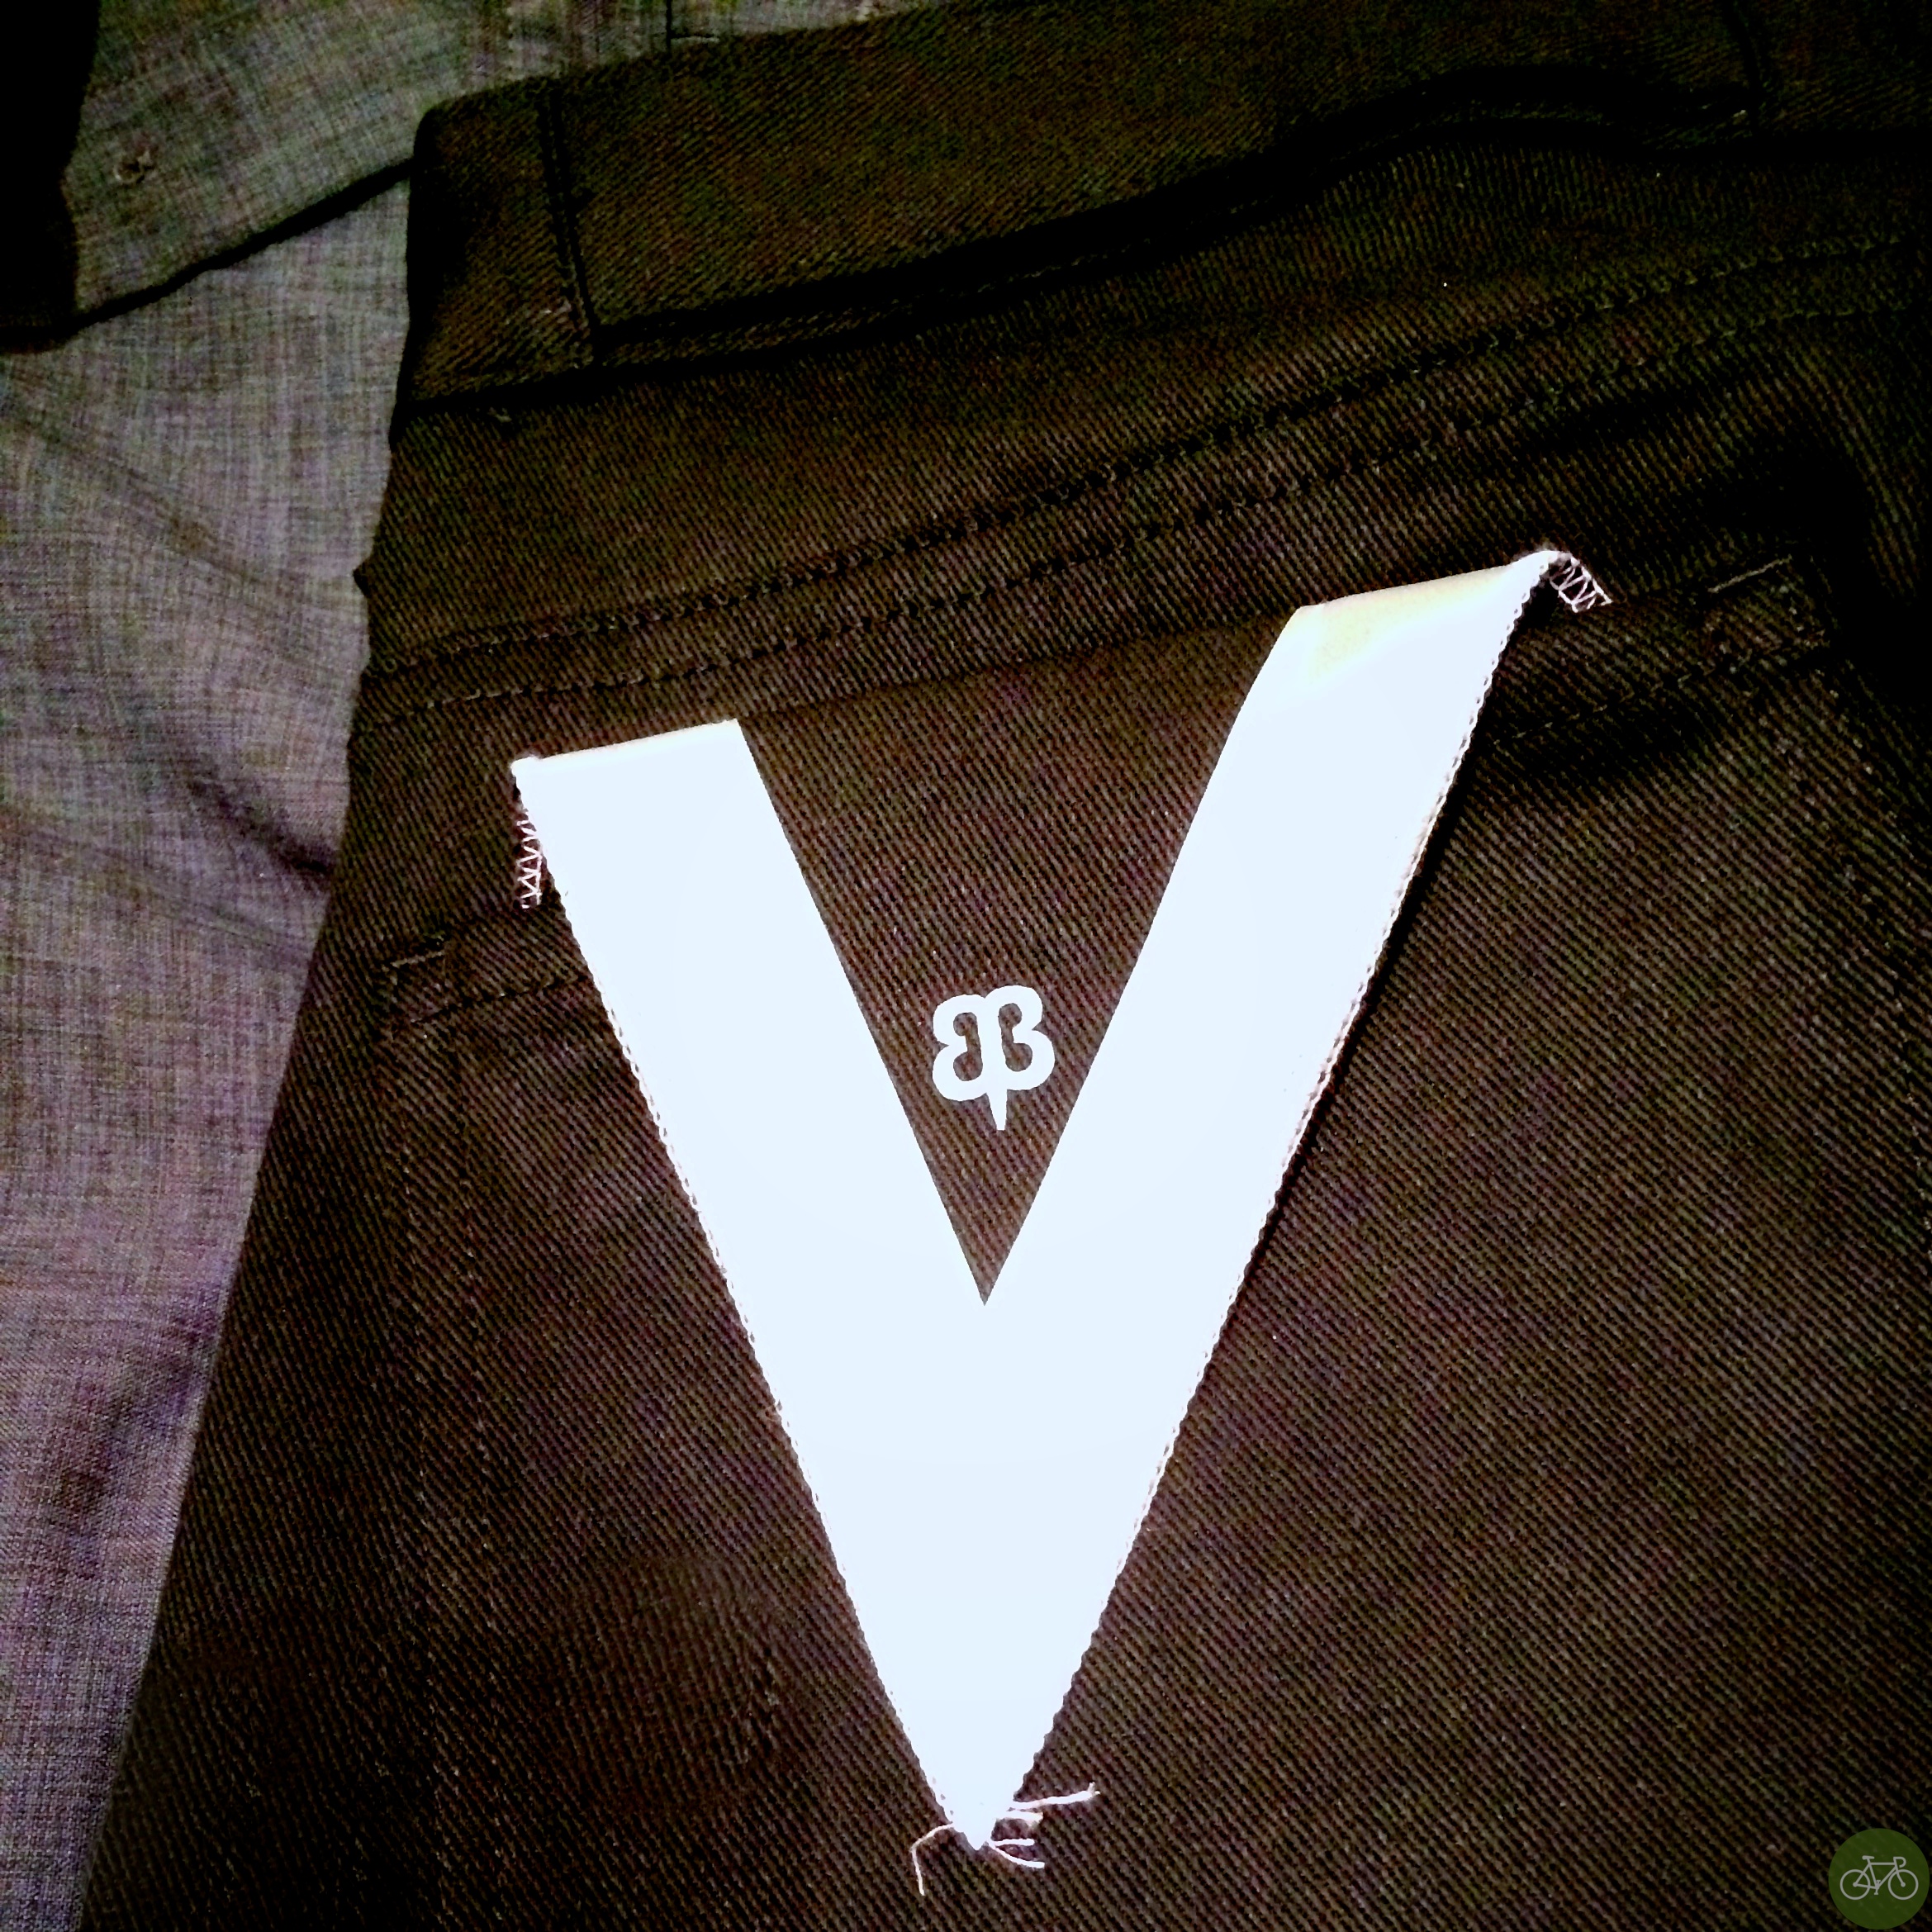 V is for Visiblity